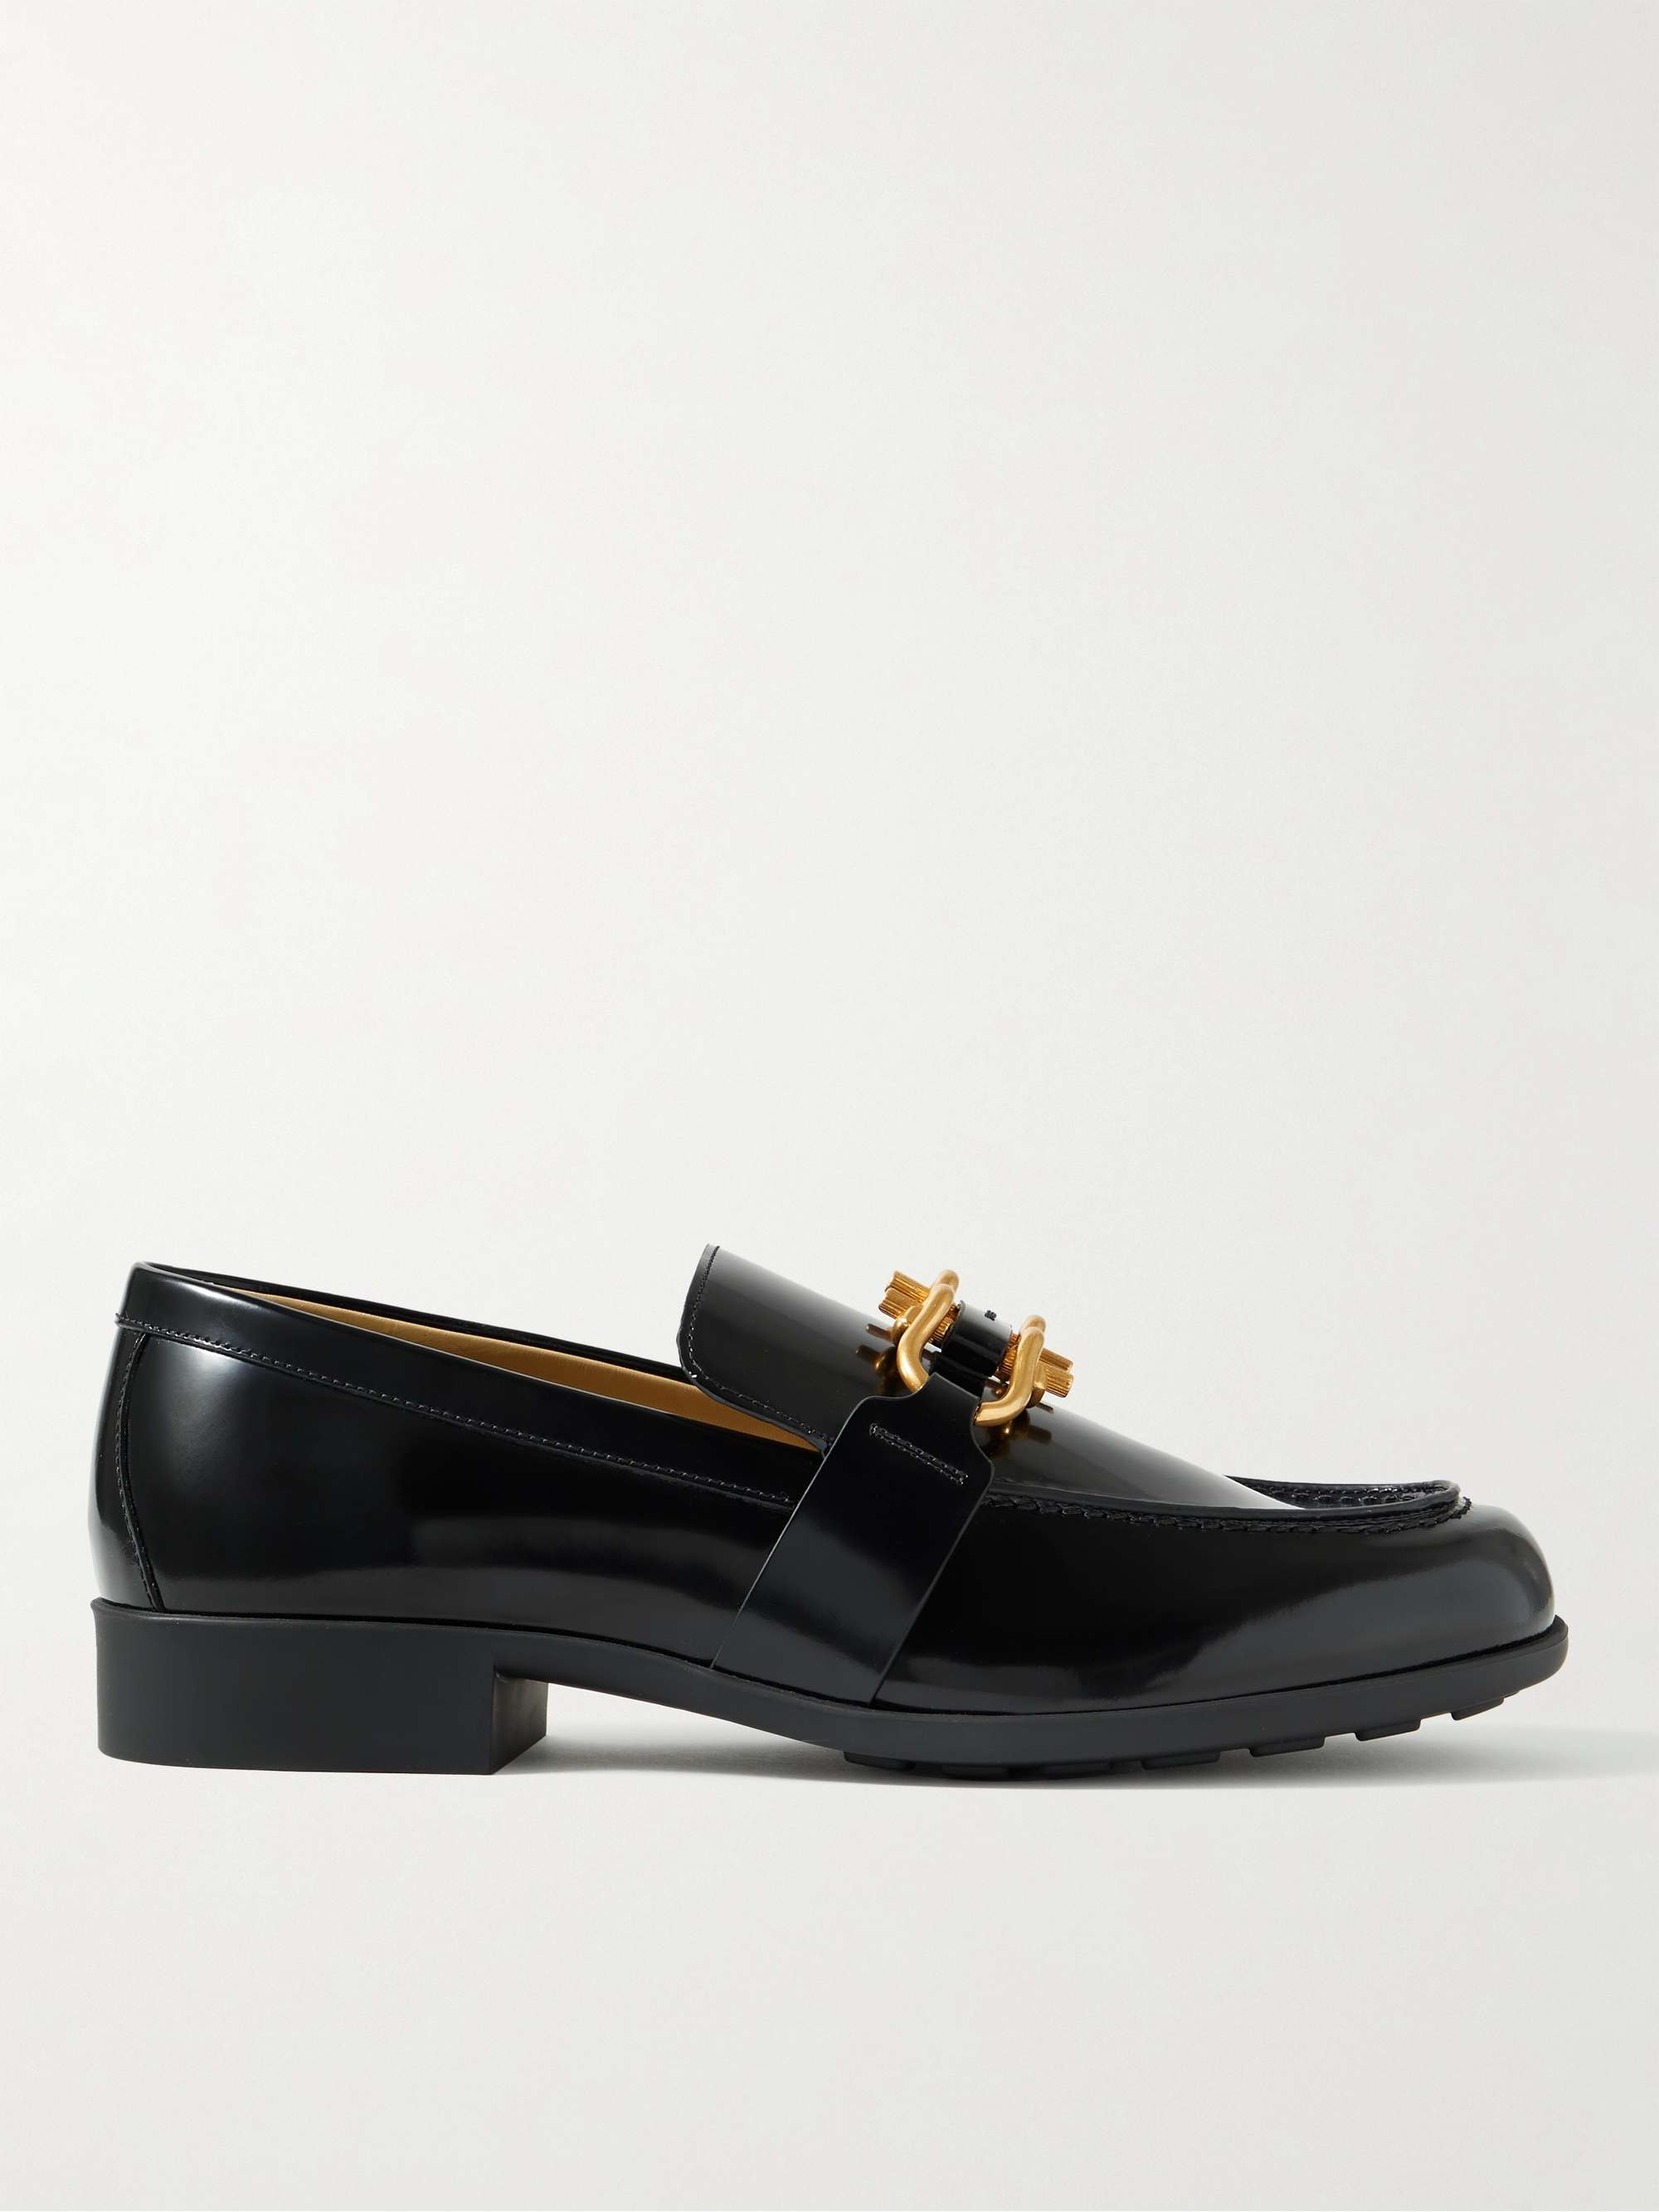 Monsieur Embellished Patent-Leather Loafers